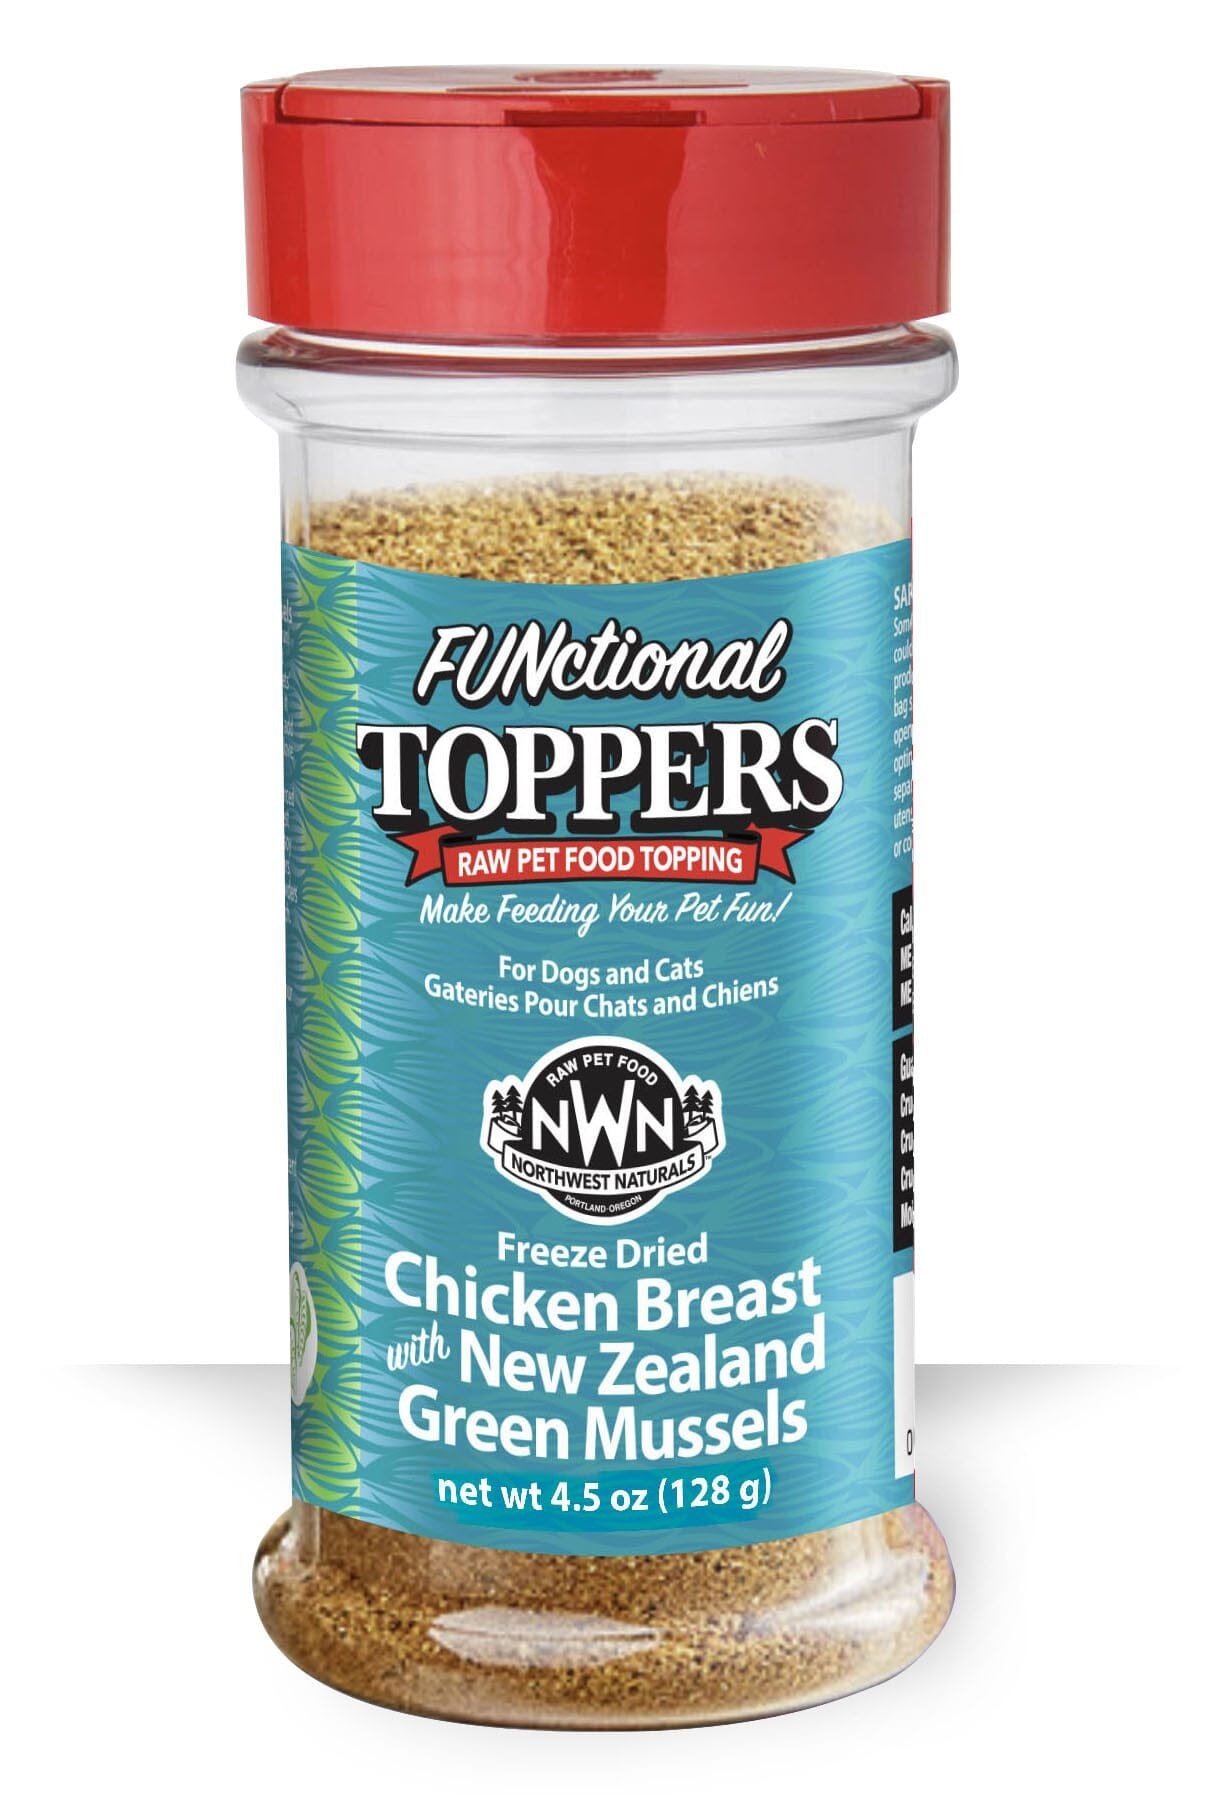 Northwest Naturals Chicken Breast with New Zealand Green Mussels Cat and Dog Food Toppers - 4.5 Oz Bottle  